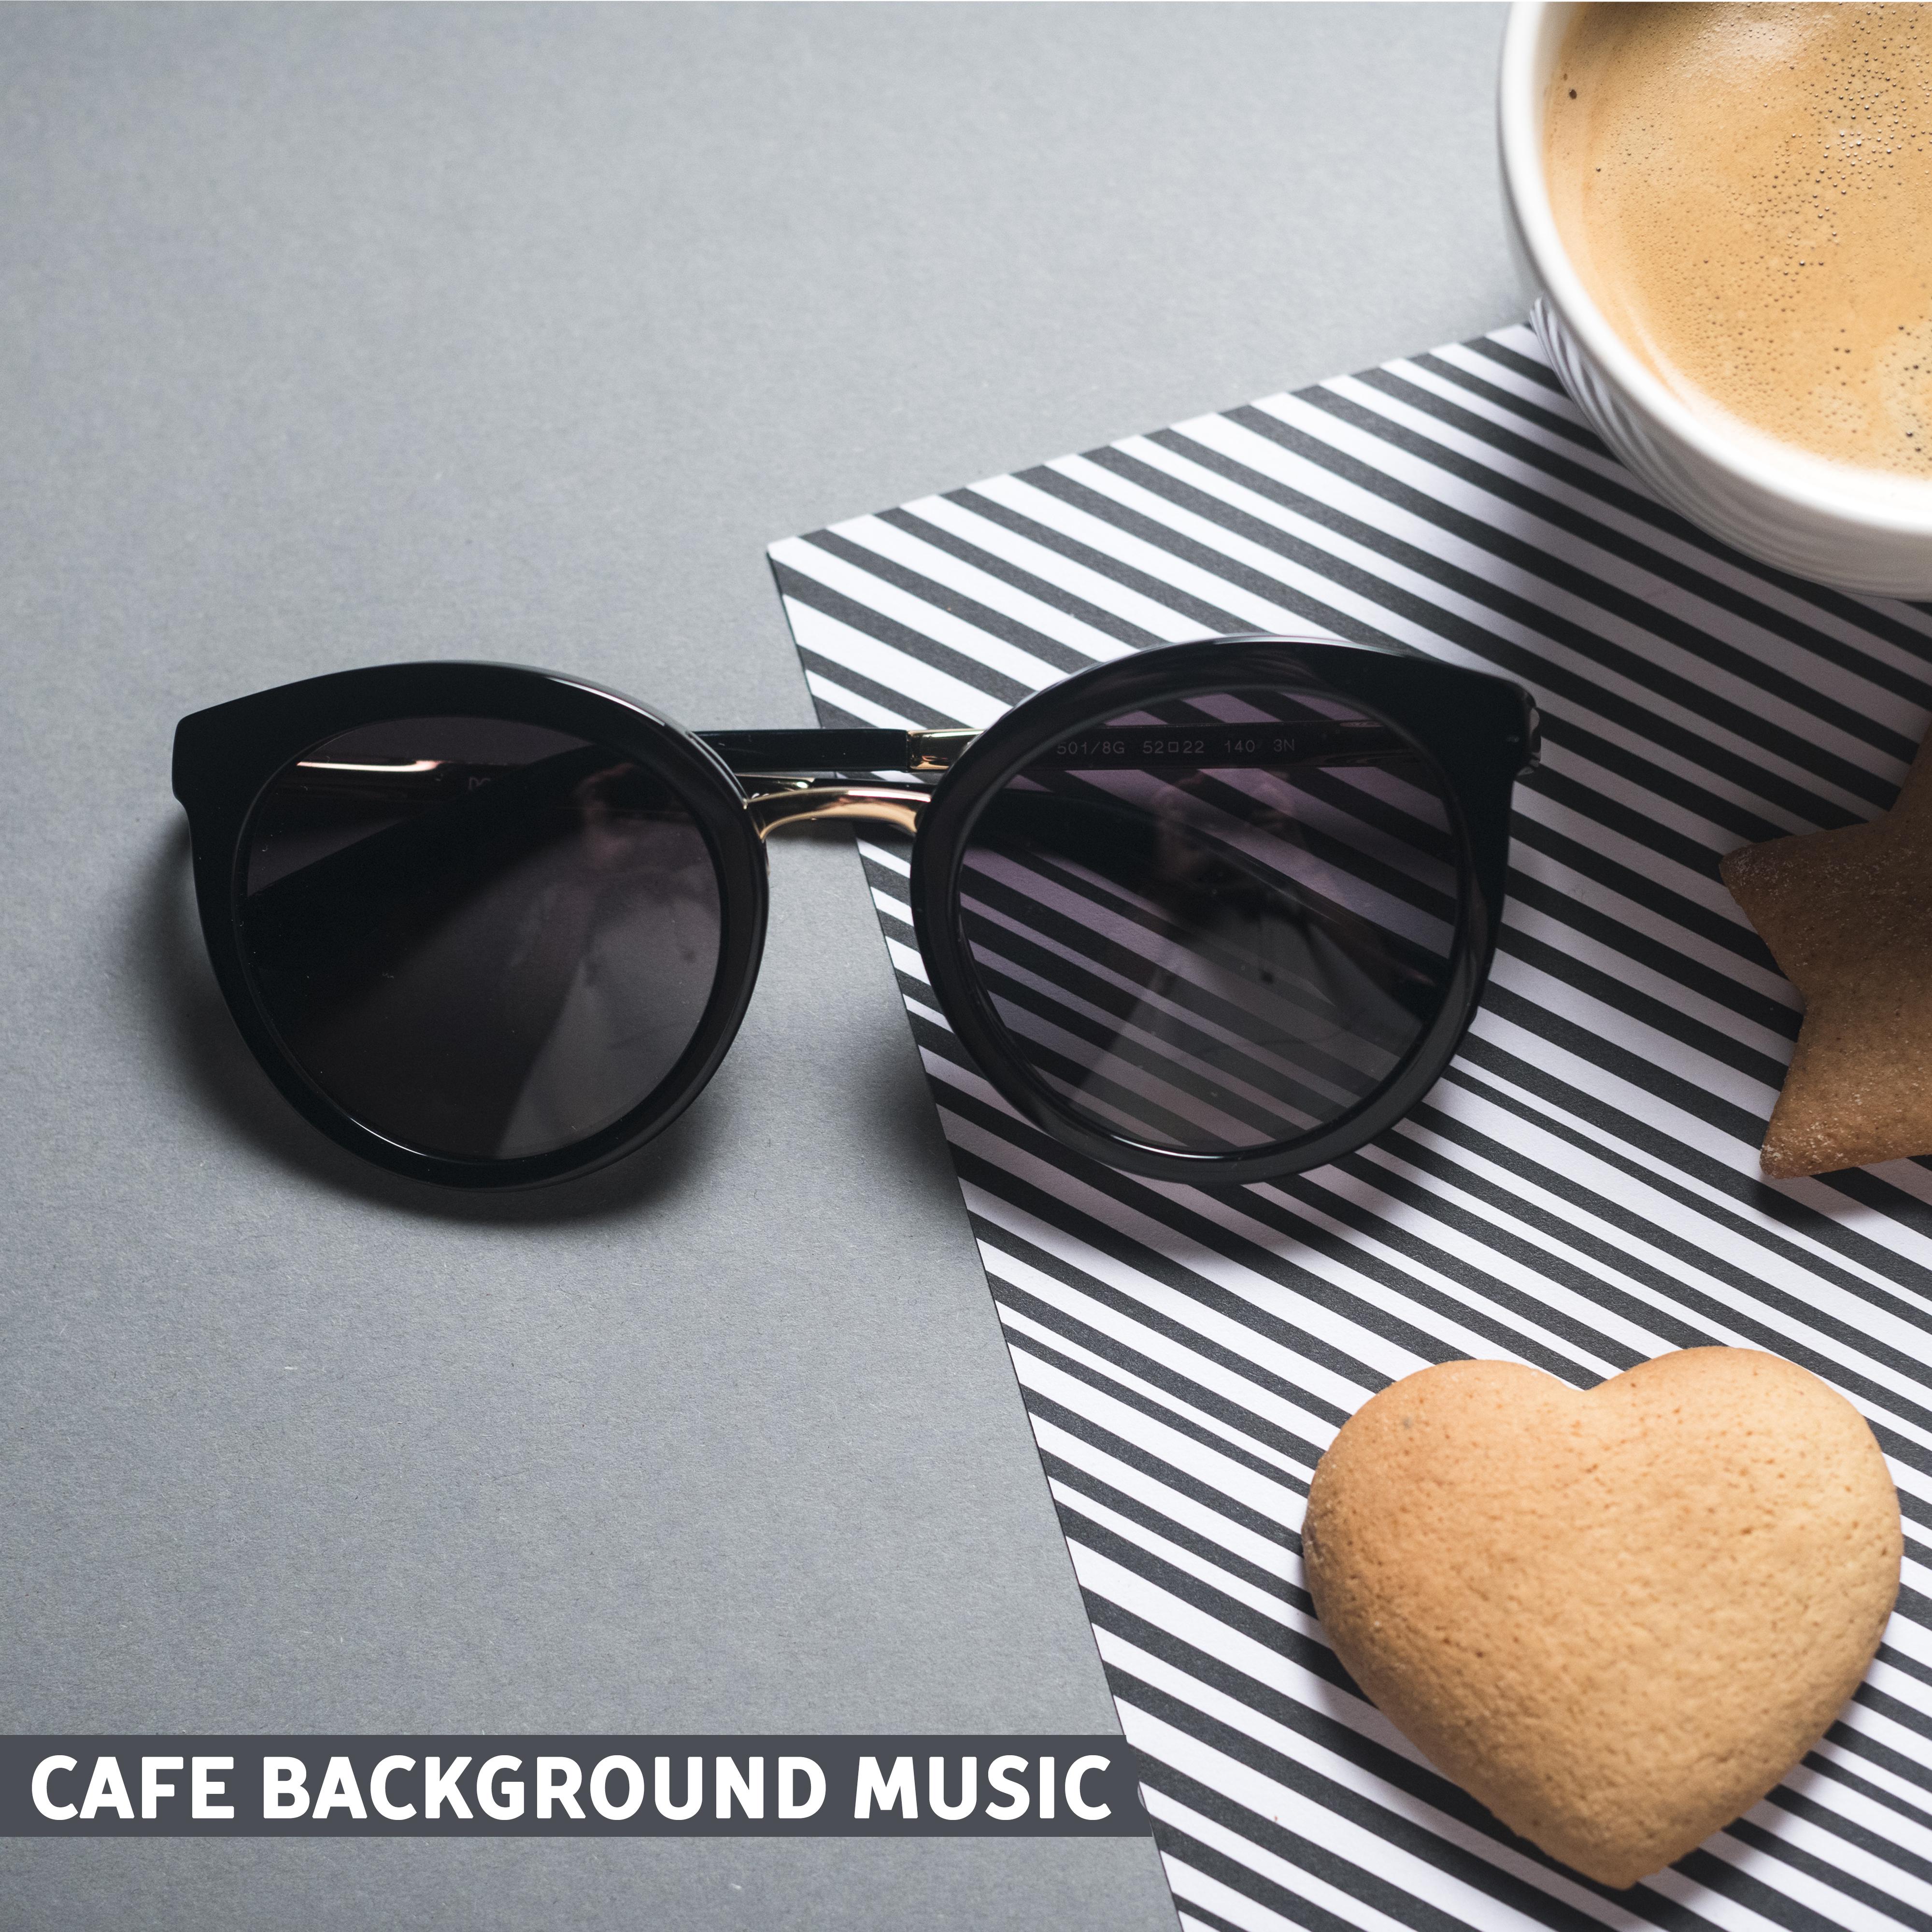 Cafe Background Music  Gentle Piano for Relaxation, Smooth Jazz for Restaurant, Dinner for Two, Coffee Talk, Pure Rest, Chilled Jazz, Ambient Music